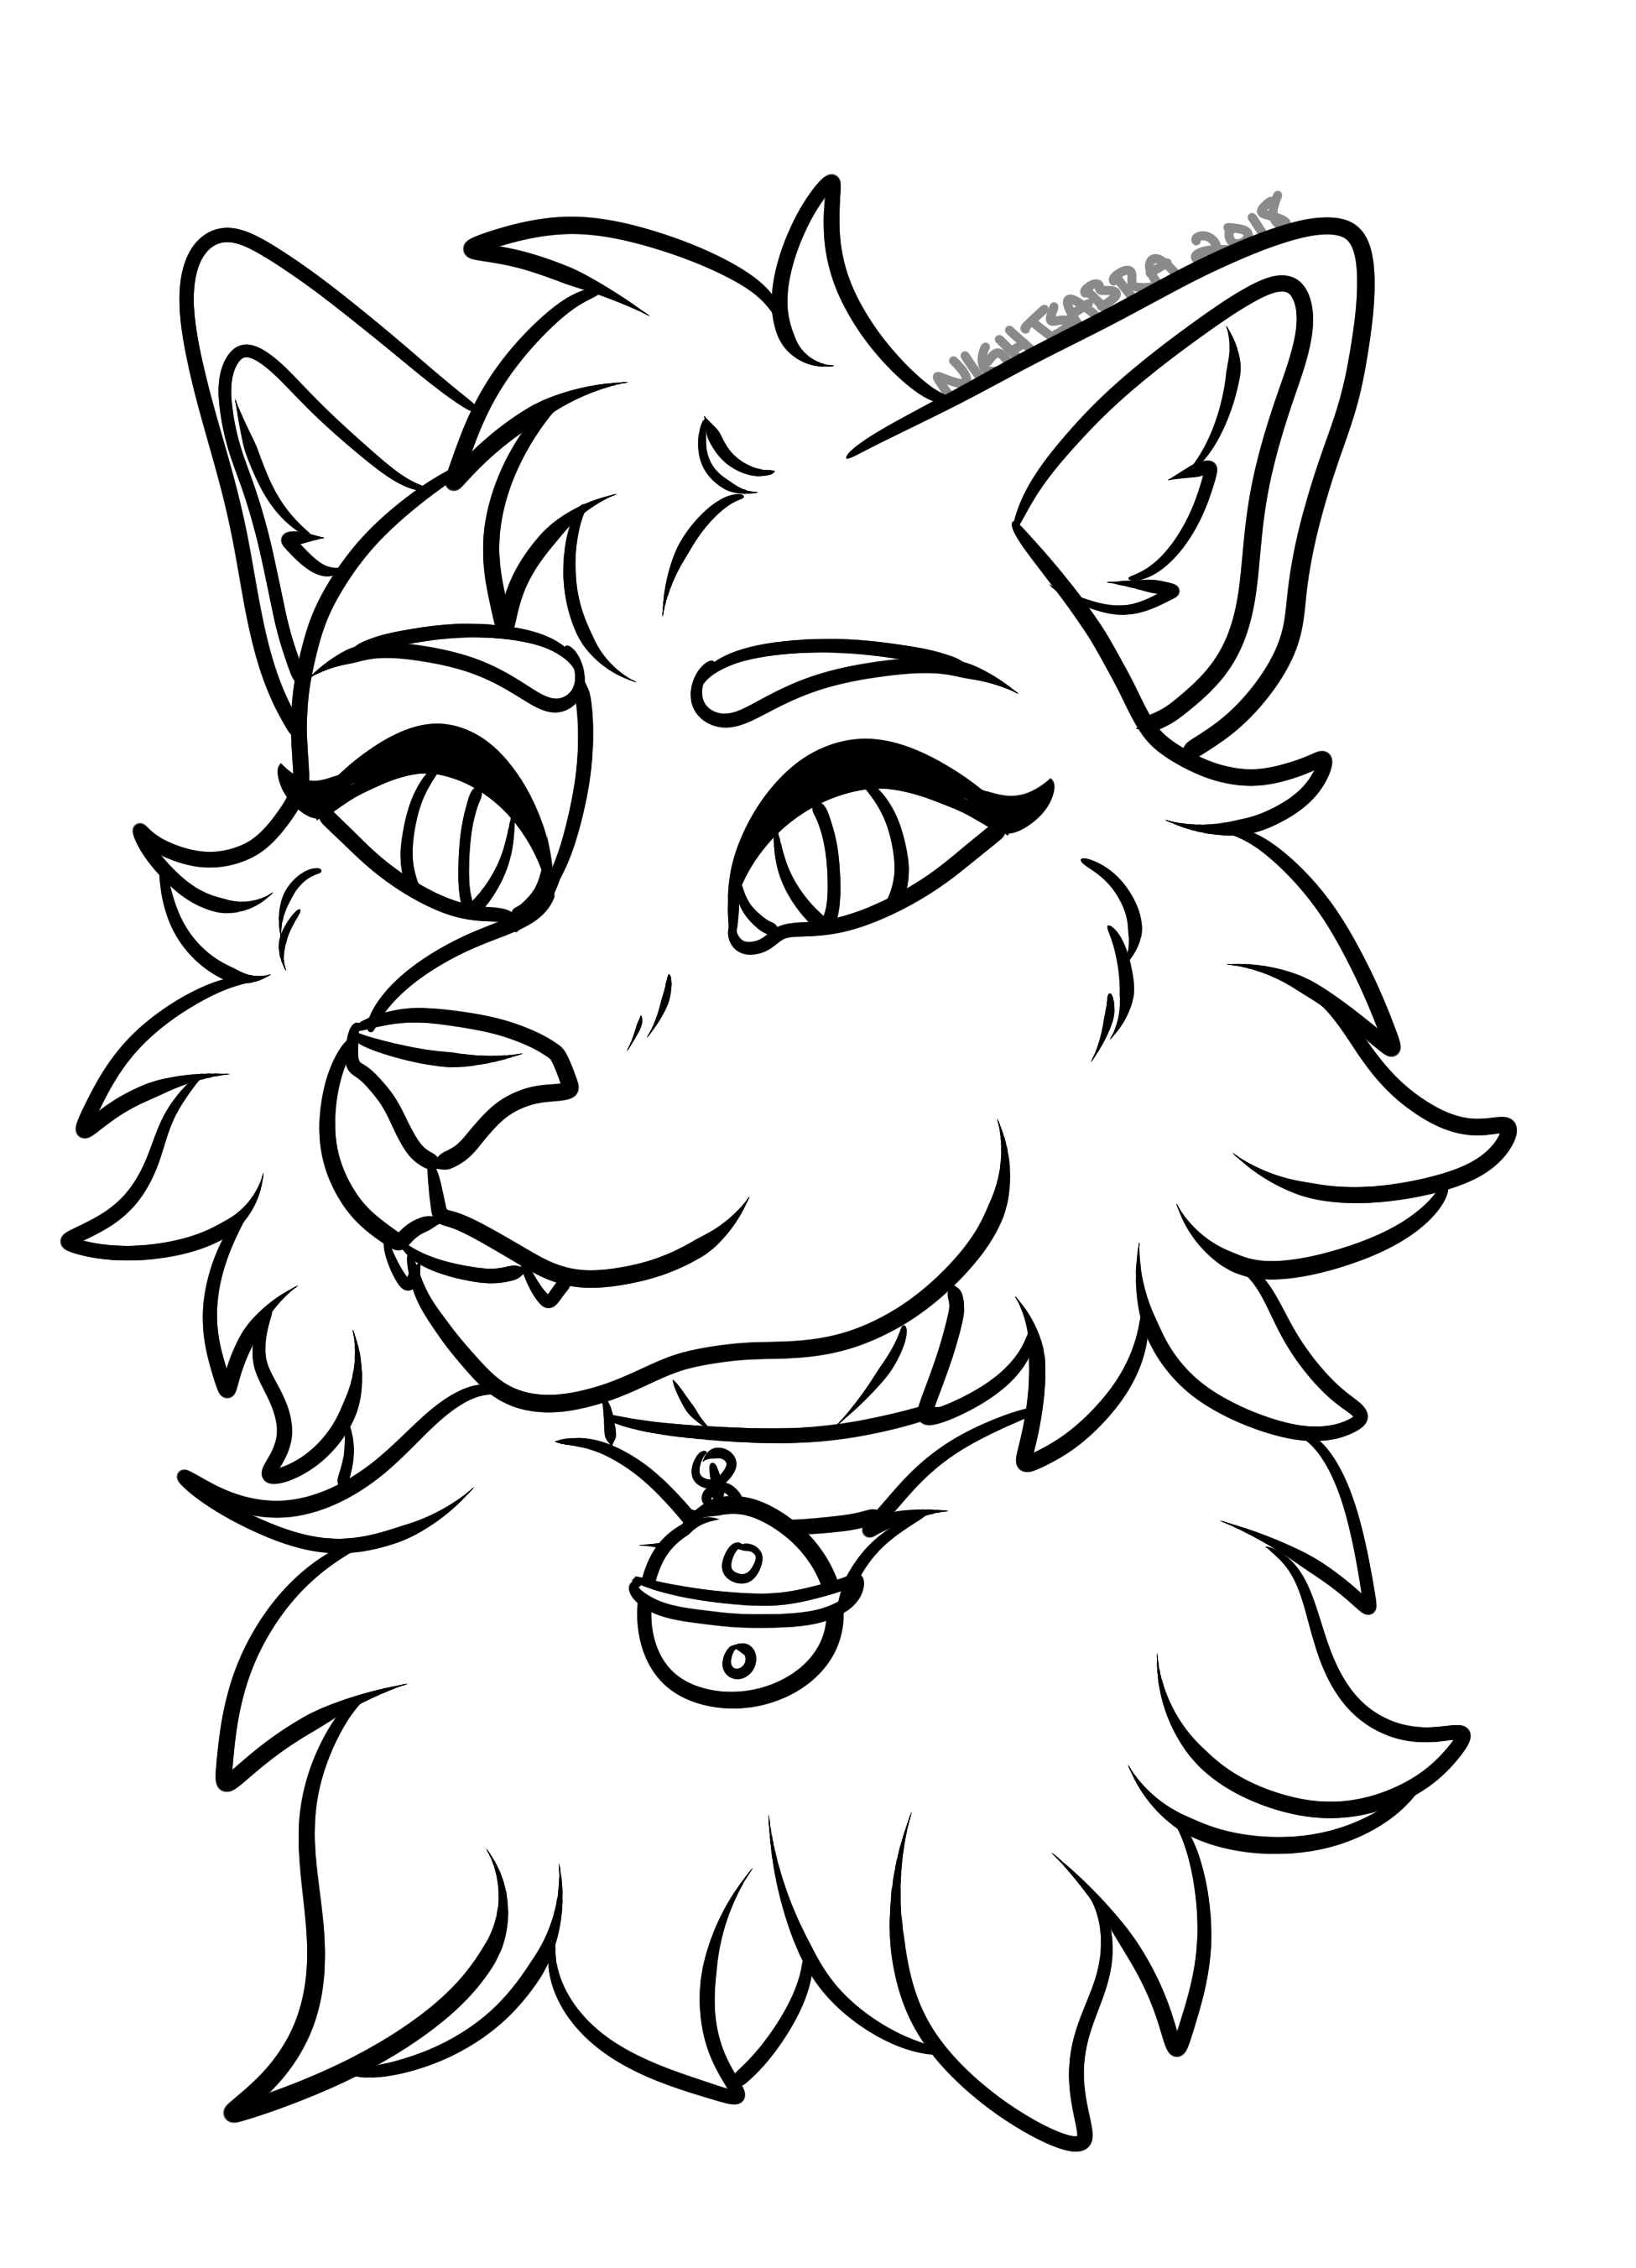 Cat Anthro Furry Base Sketch Coloring Page.